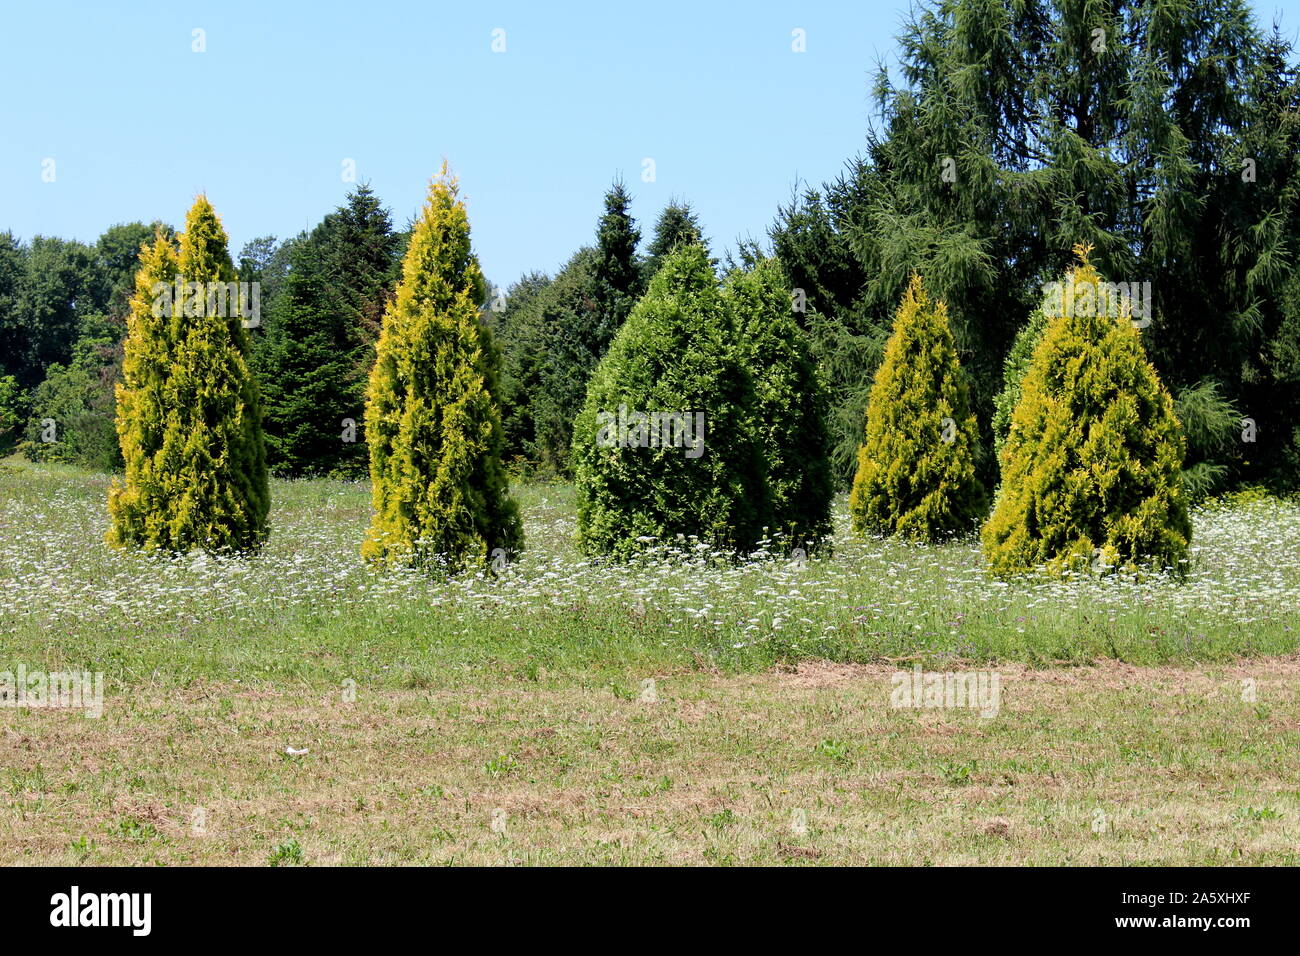 Uncut Leaves High Resolution Stock Photography and Images - Alamy